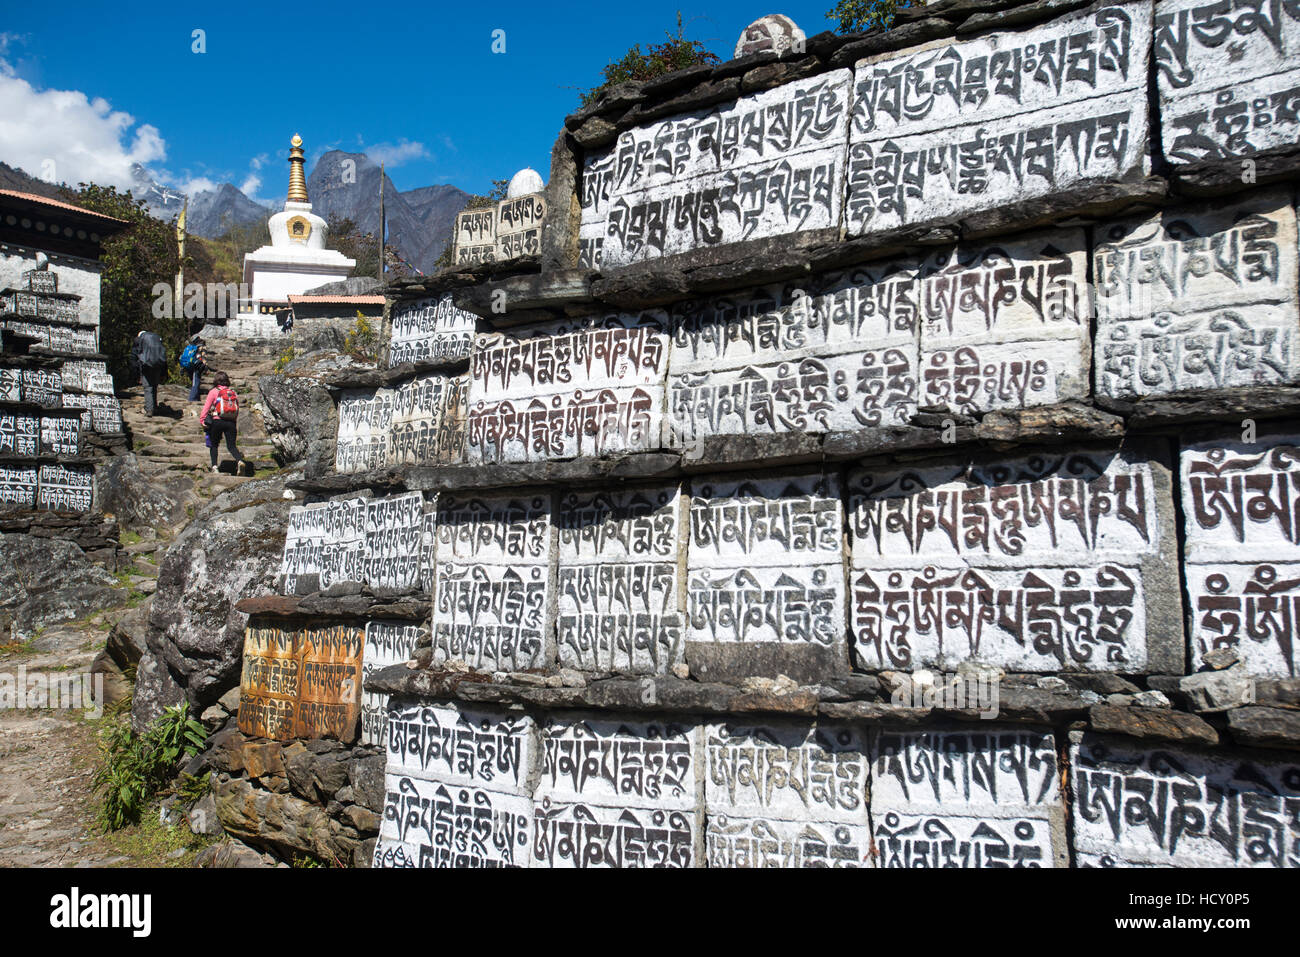 Mani stones inscribed with an ancient Buddhist mantra decorate the trail to Everest Base Camp, Khumbu Region, Nepal Stock Photo